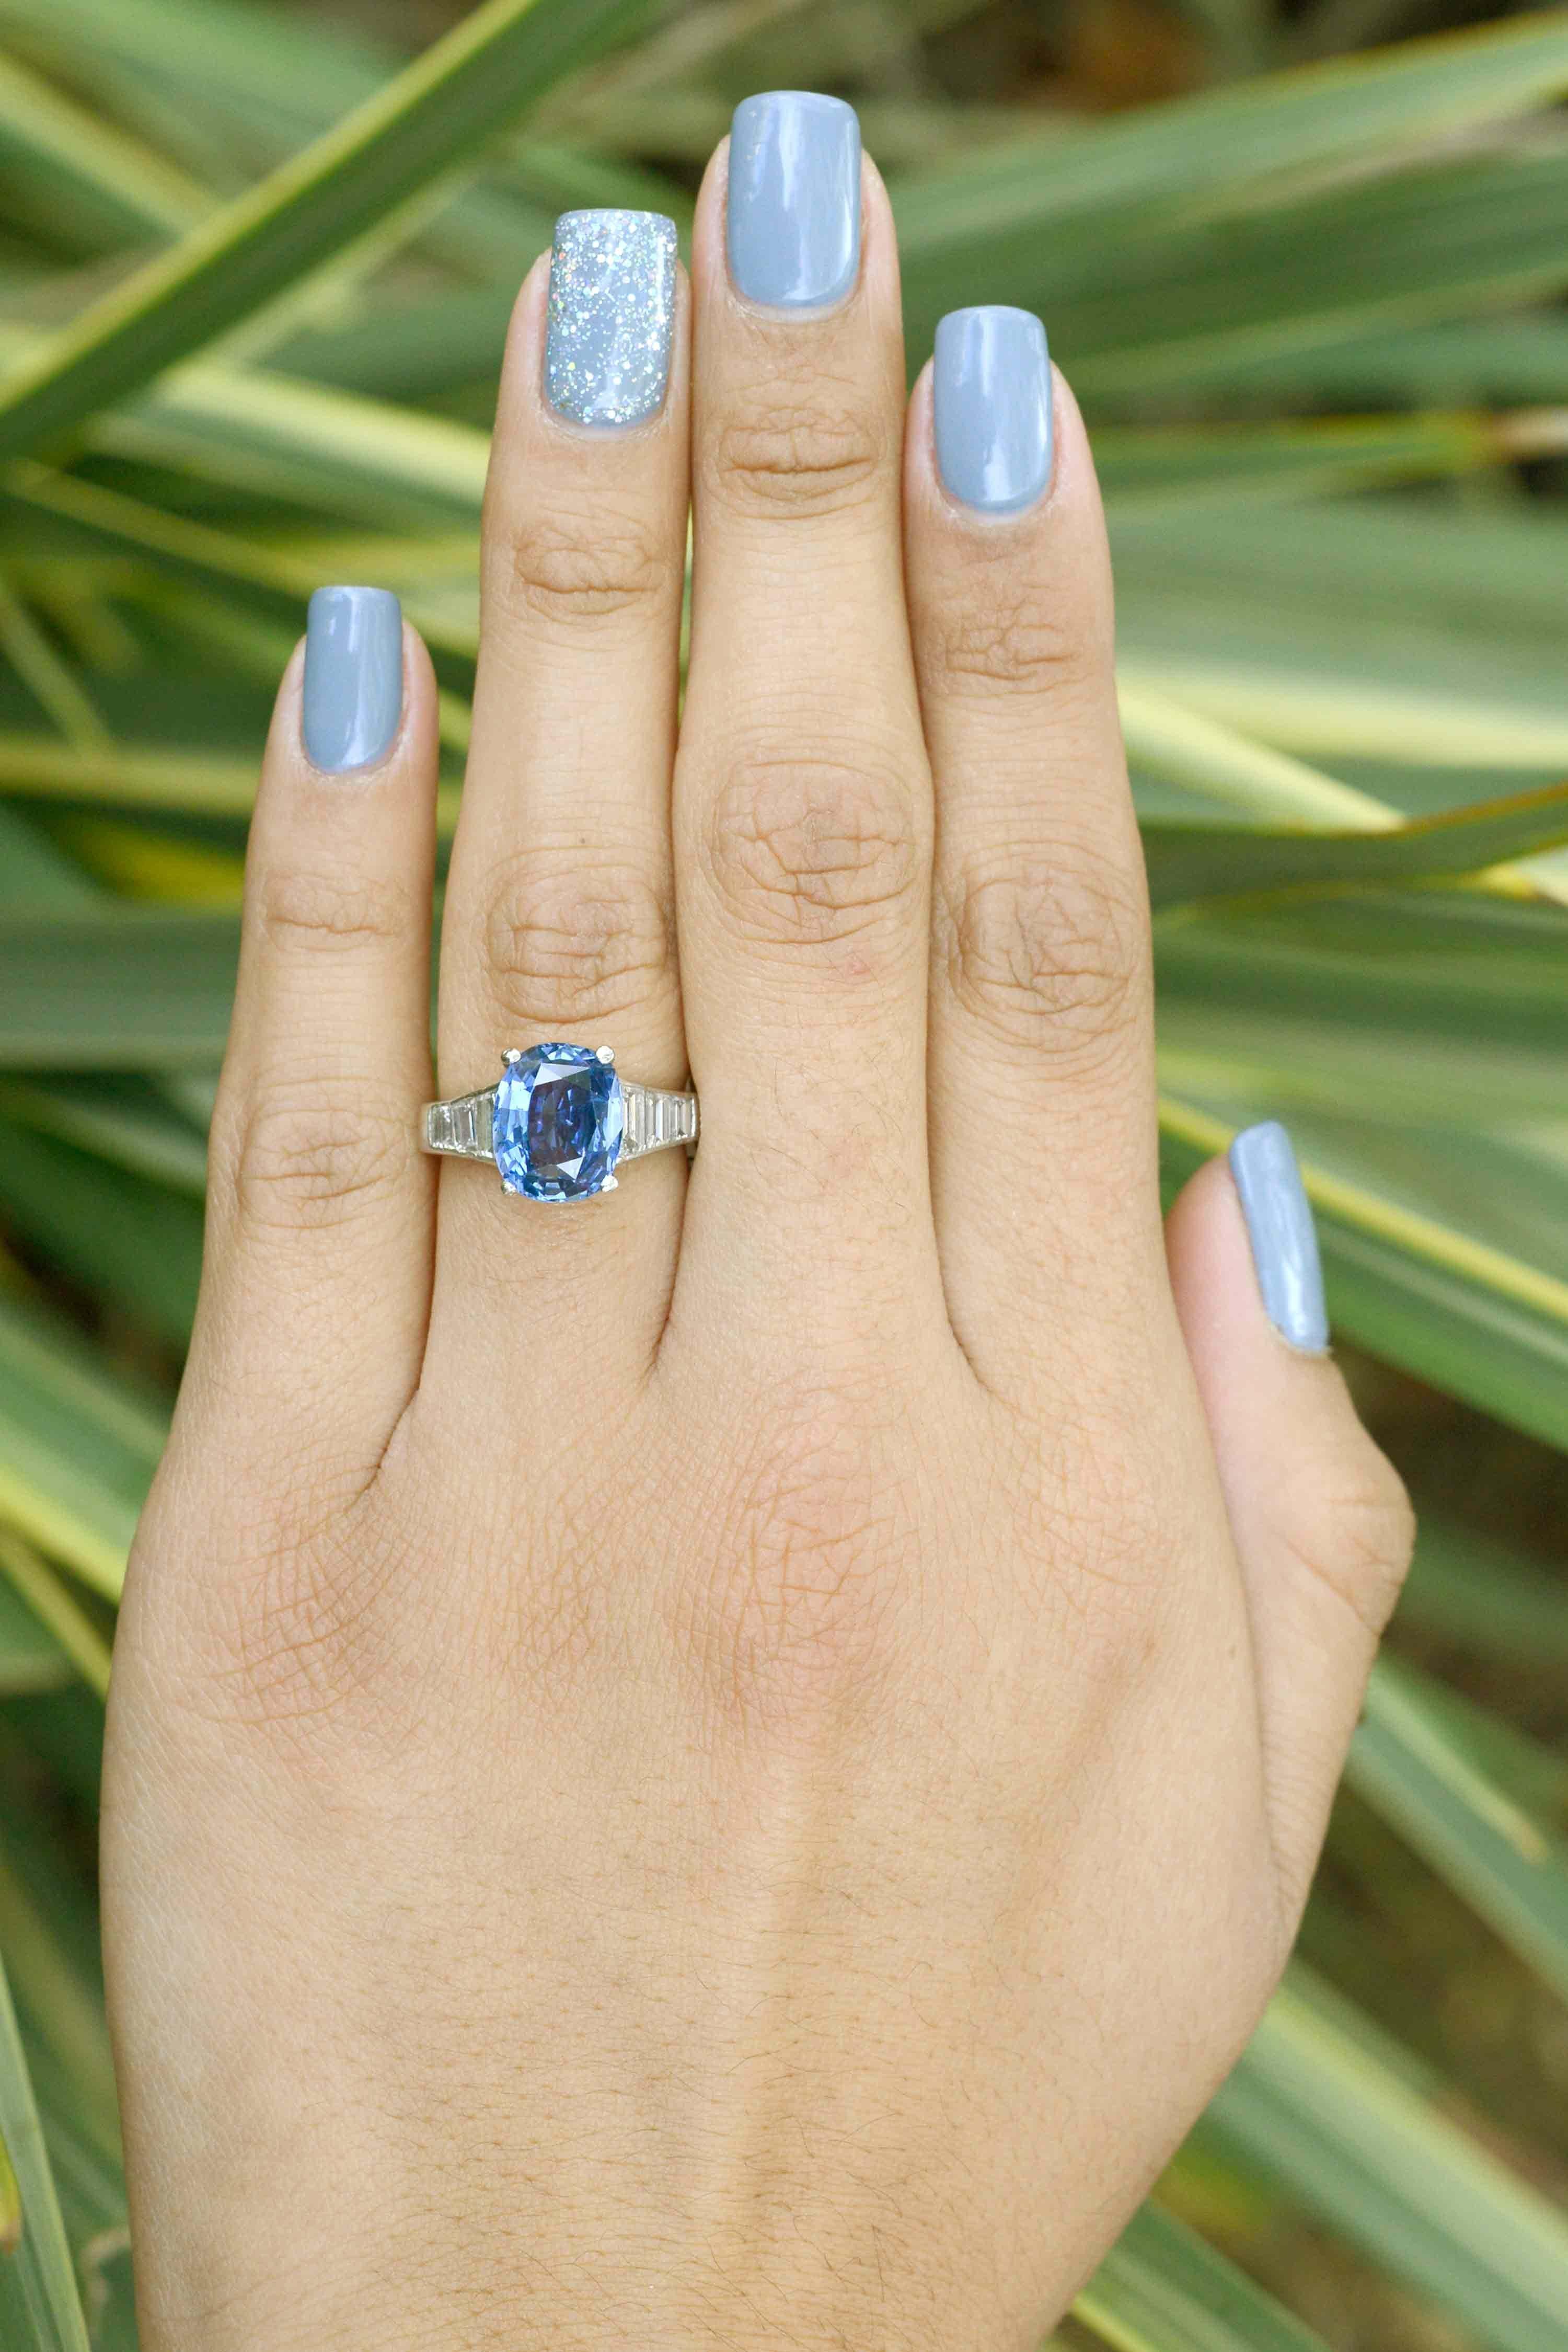 The Flagstaff Vintage 5 Carat unheated Art Deco style sapphire diamond engagement ring. A no heat, GIA certified rare gemstone of Ceylon (Sri Lanka) origins with a luxurious, denim-blue color and captivating clarity. This vintage Jazz Age estate